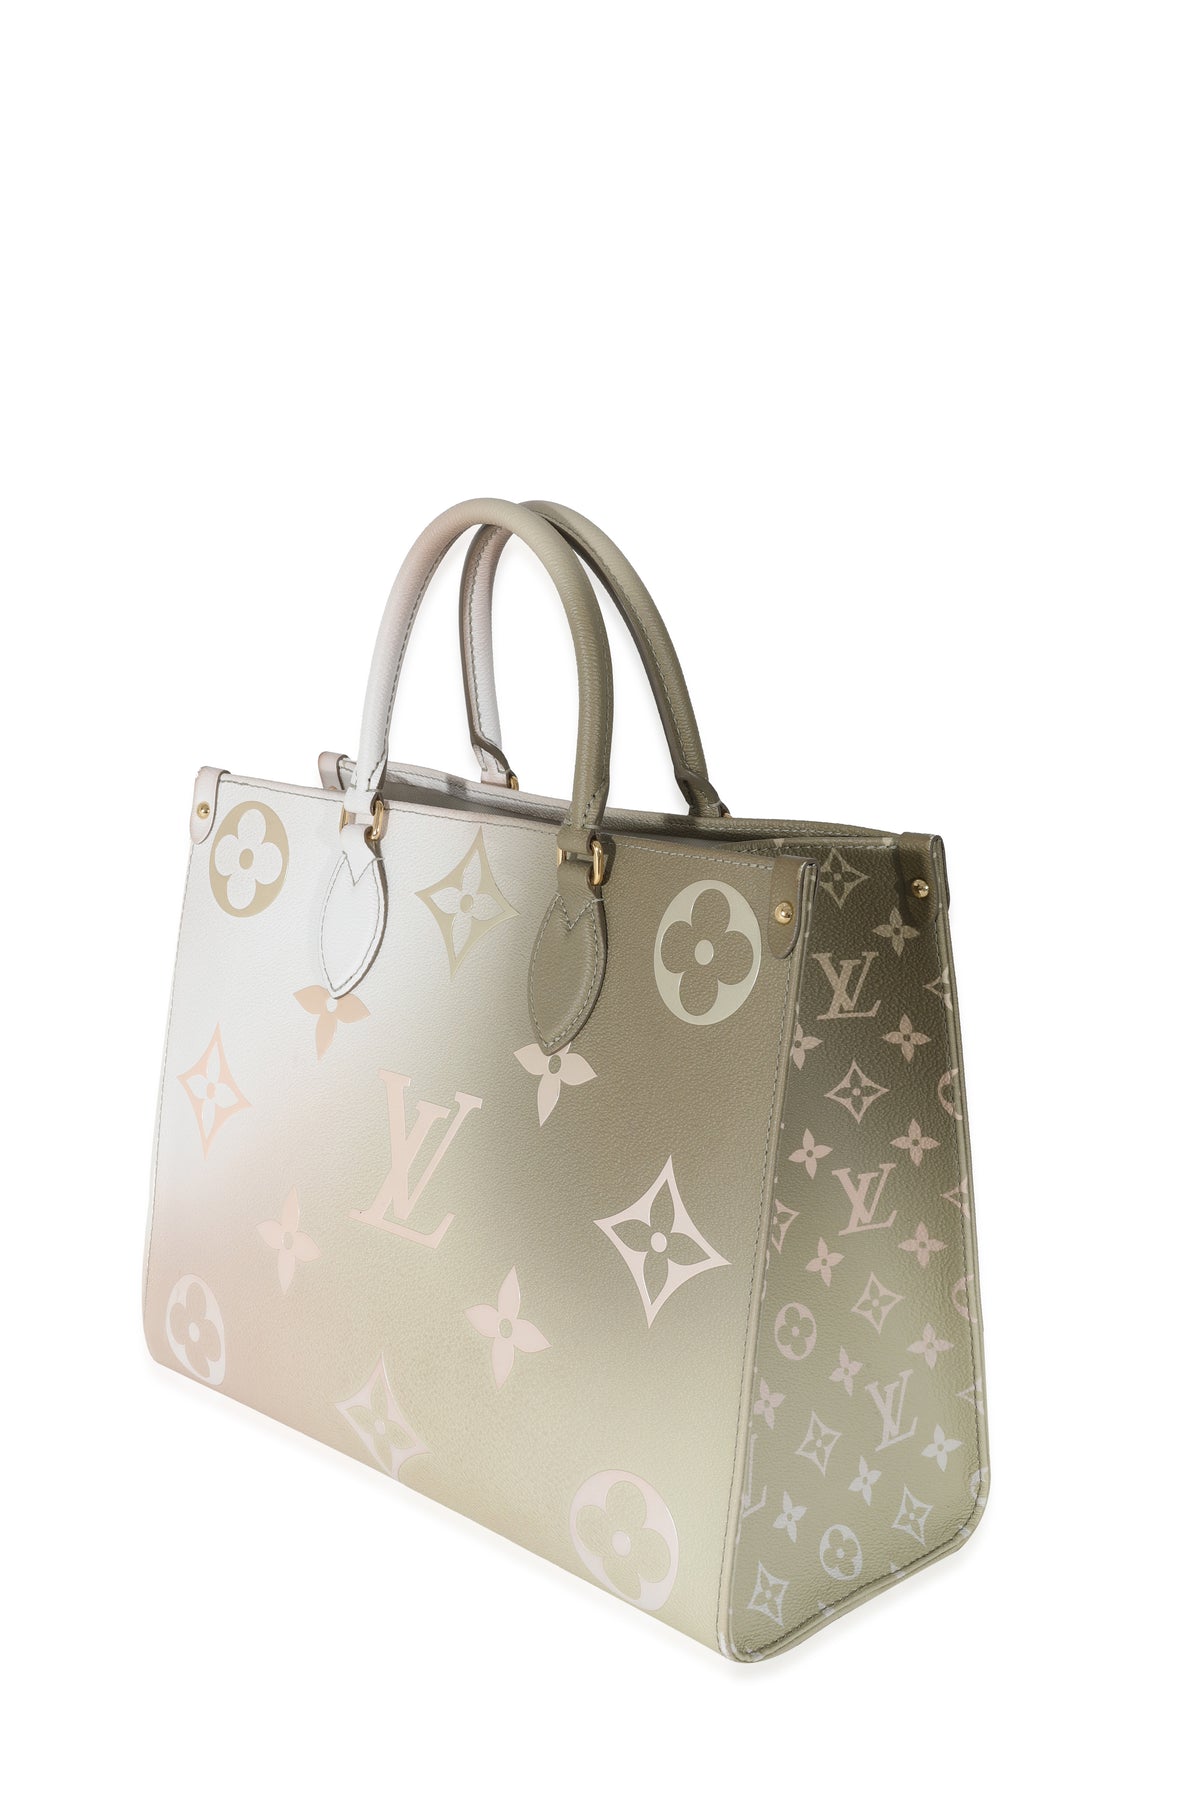 Louis Vuitton Neverfull MM Sunset Kaki in Coated Canvas with Gold